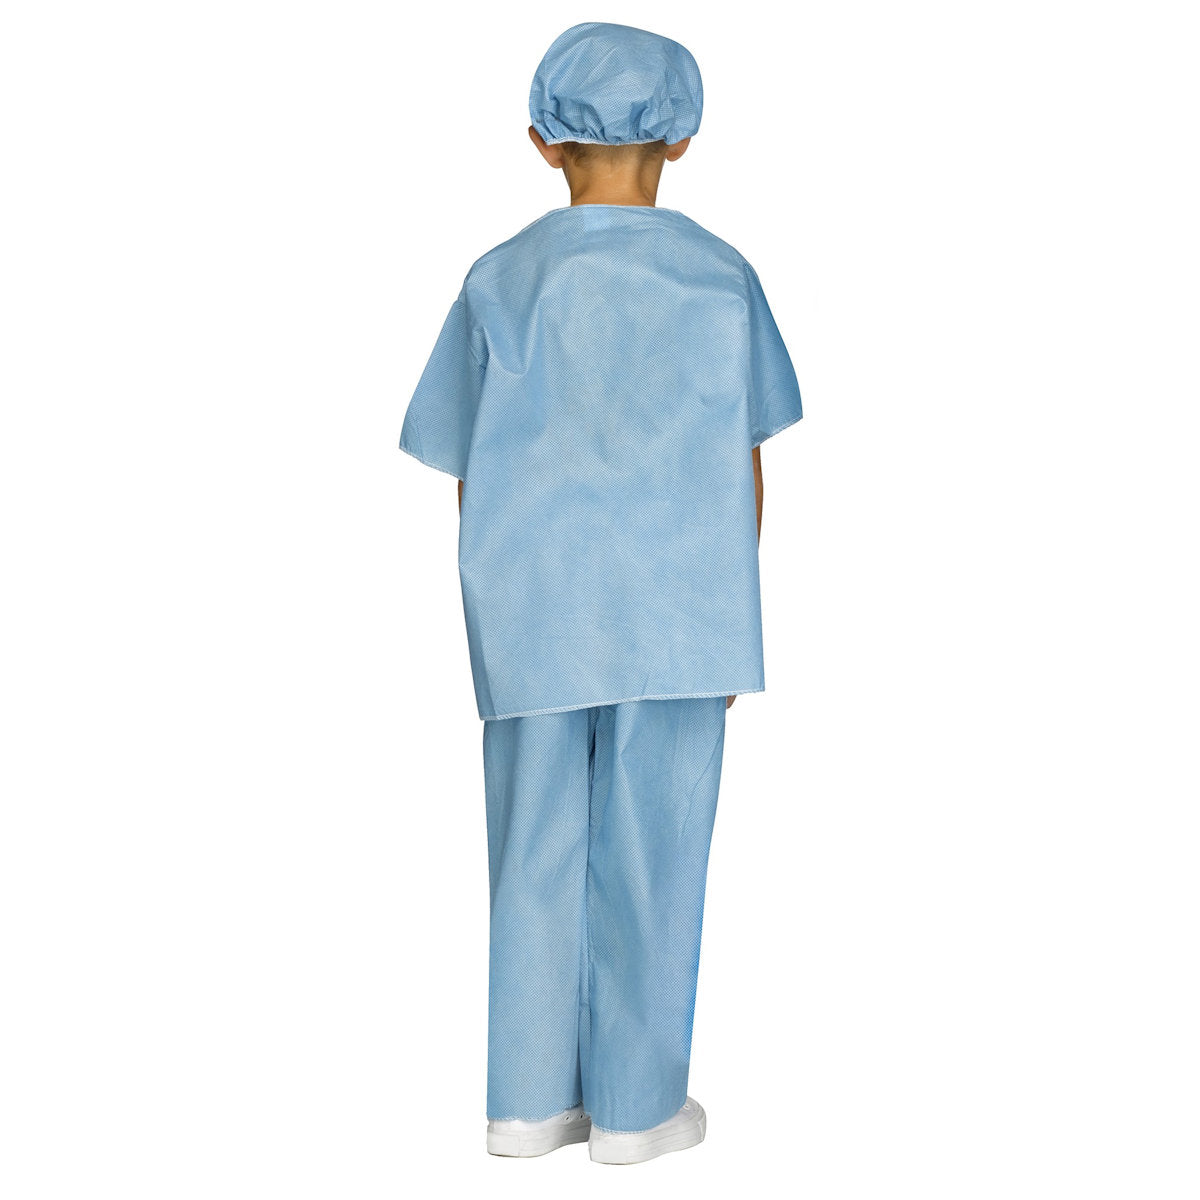 Surgeon Doctor Child Costume with cap and face mask